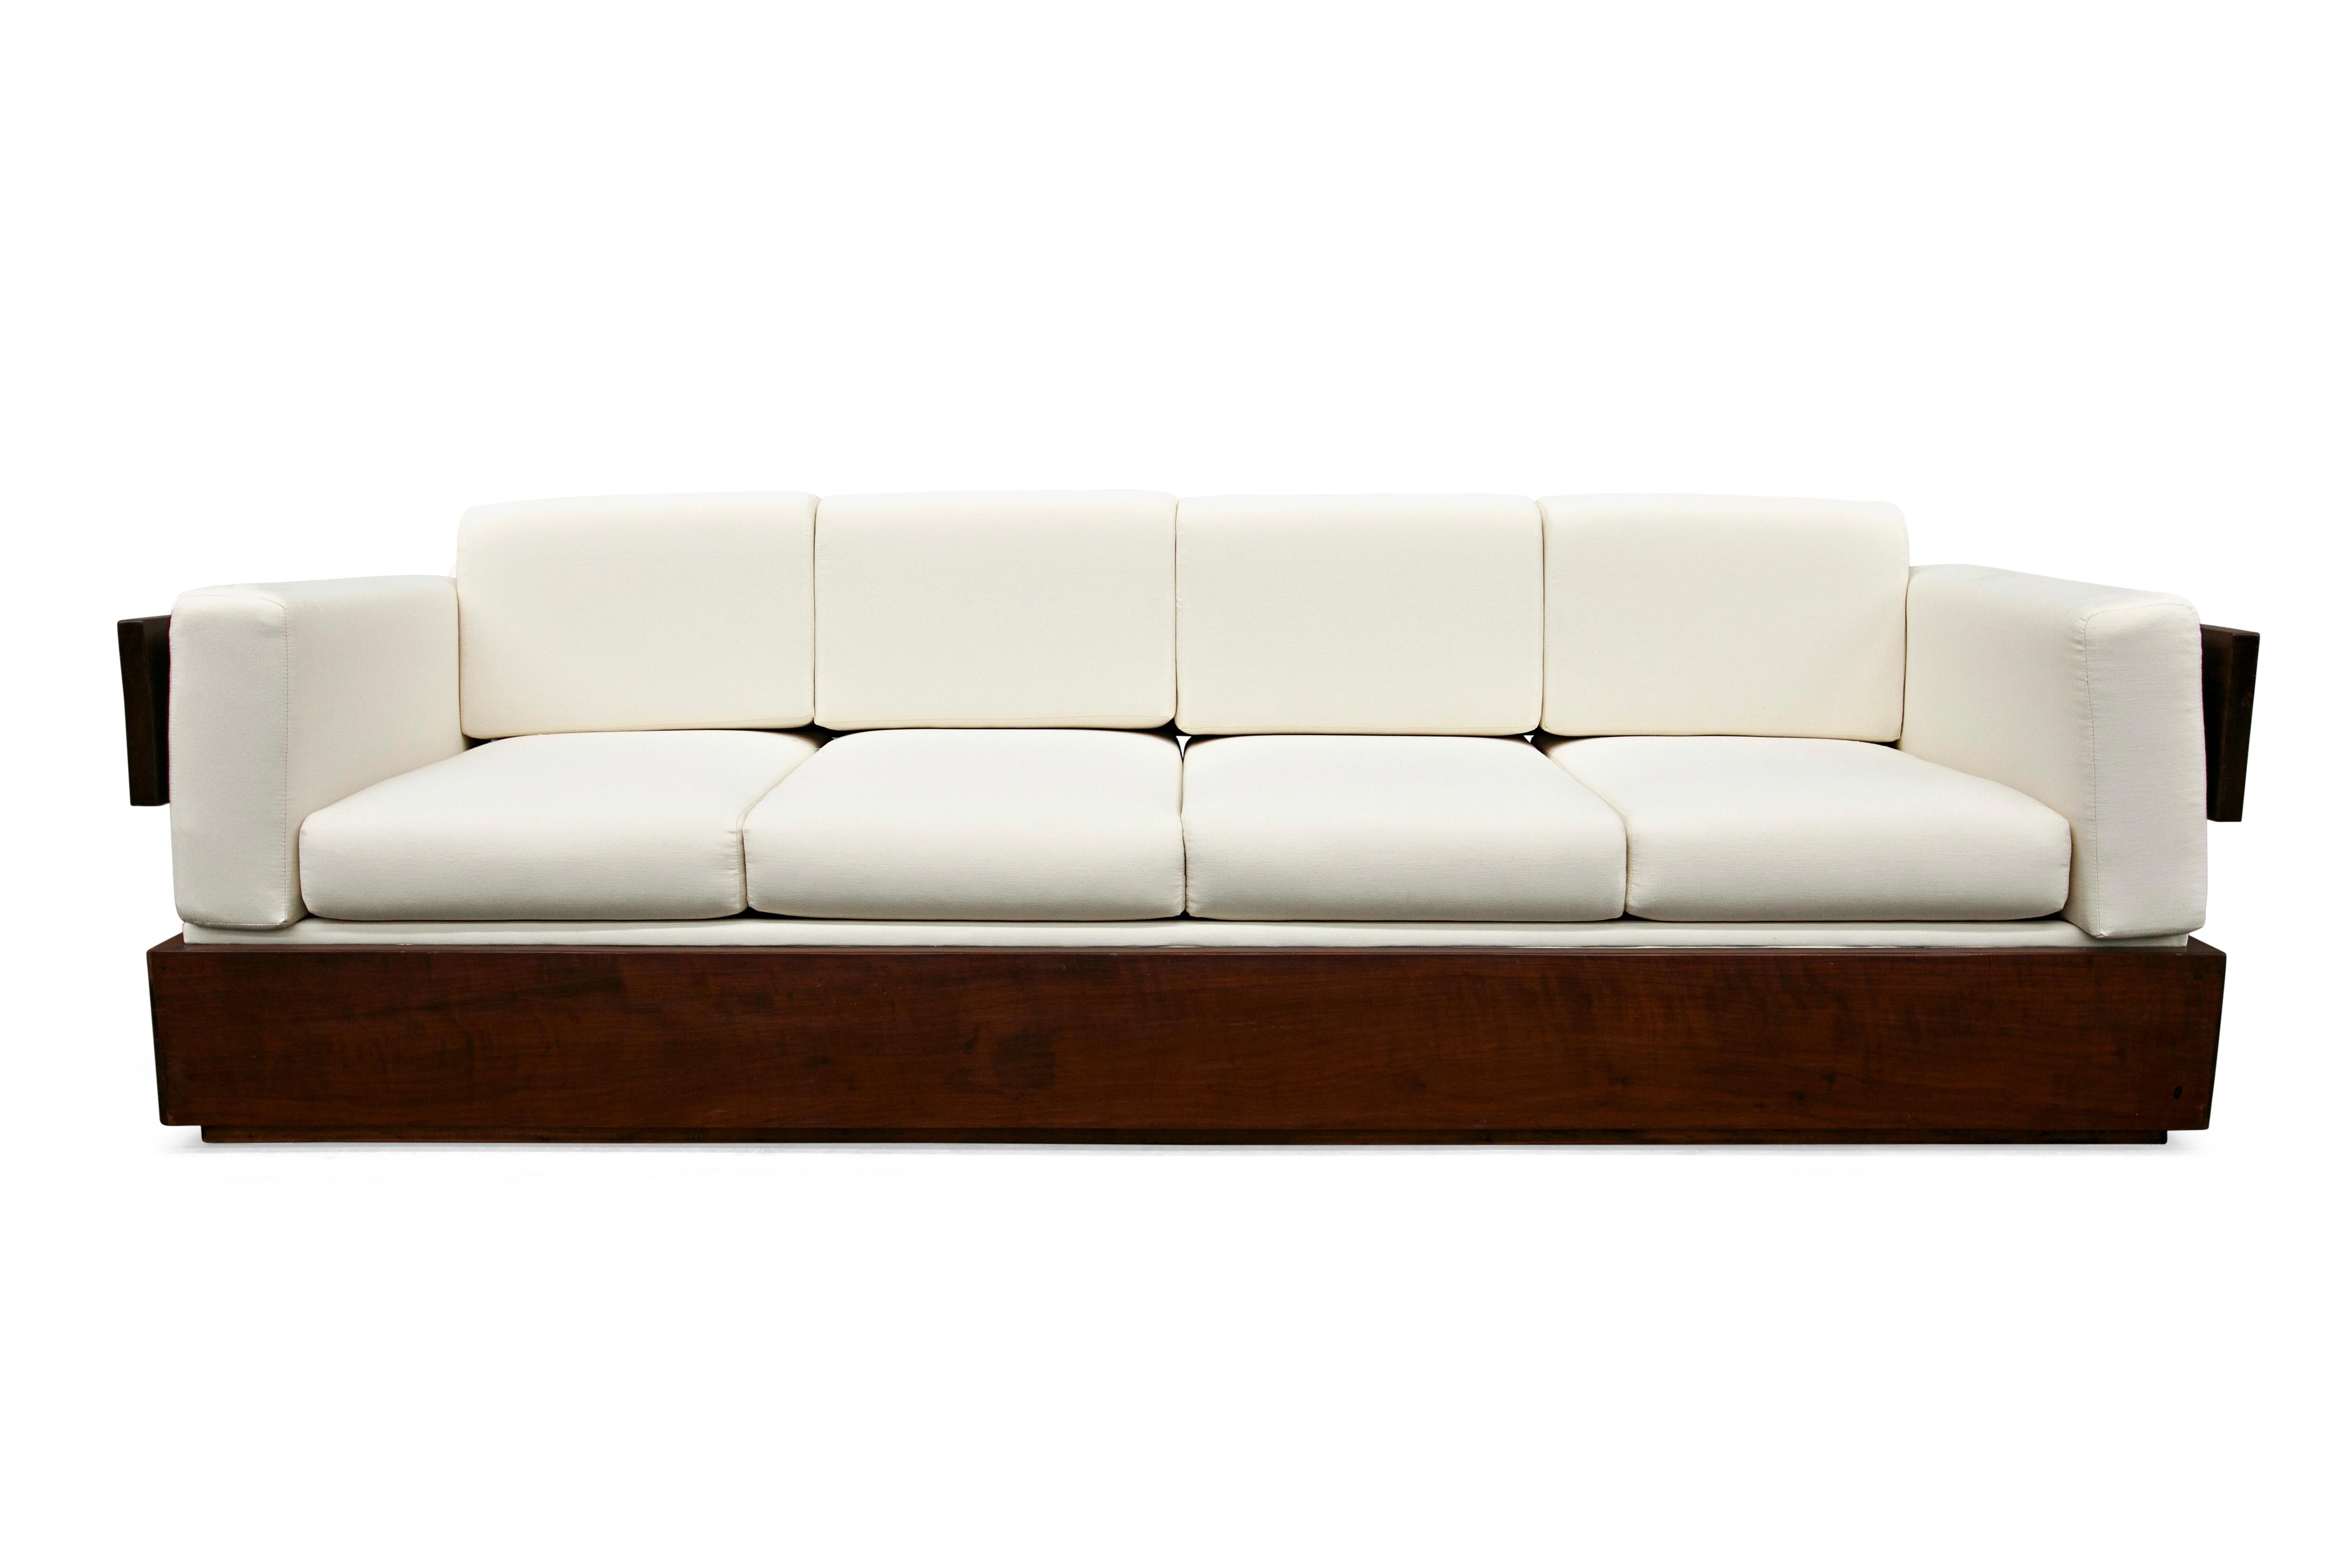 This Brazilian Modern Sofa in Hardwood and White Linen by Celina made in the 60s is nothing less than spectacular!

The frame of the sofa is made with Brazilian Rosewood  and the cushions have been reupholstered with white linen. The shape of the